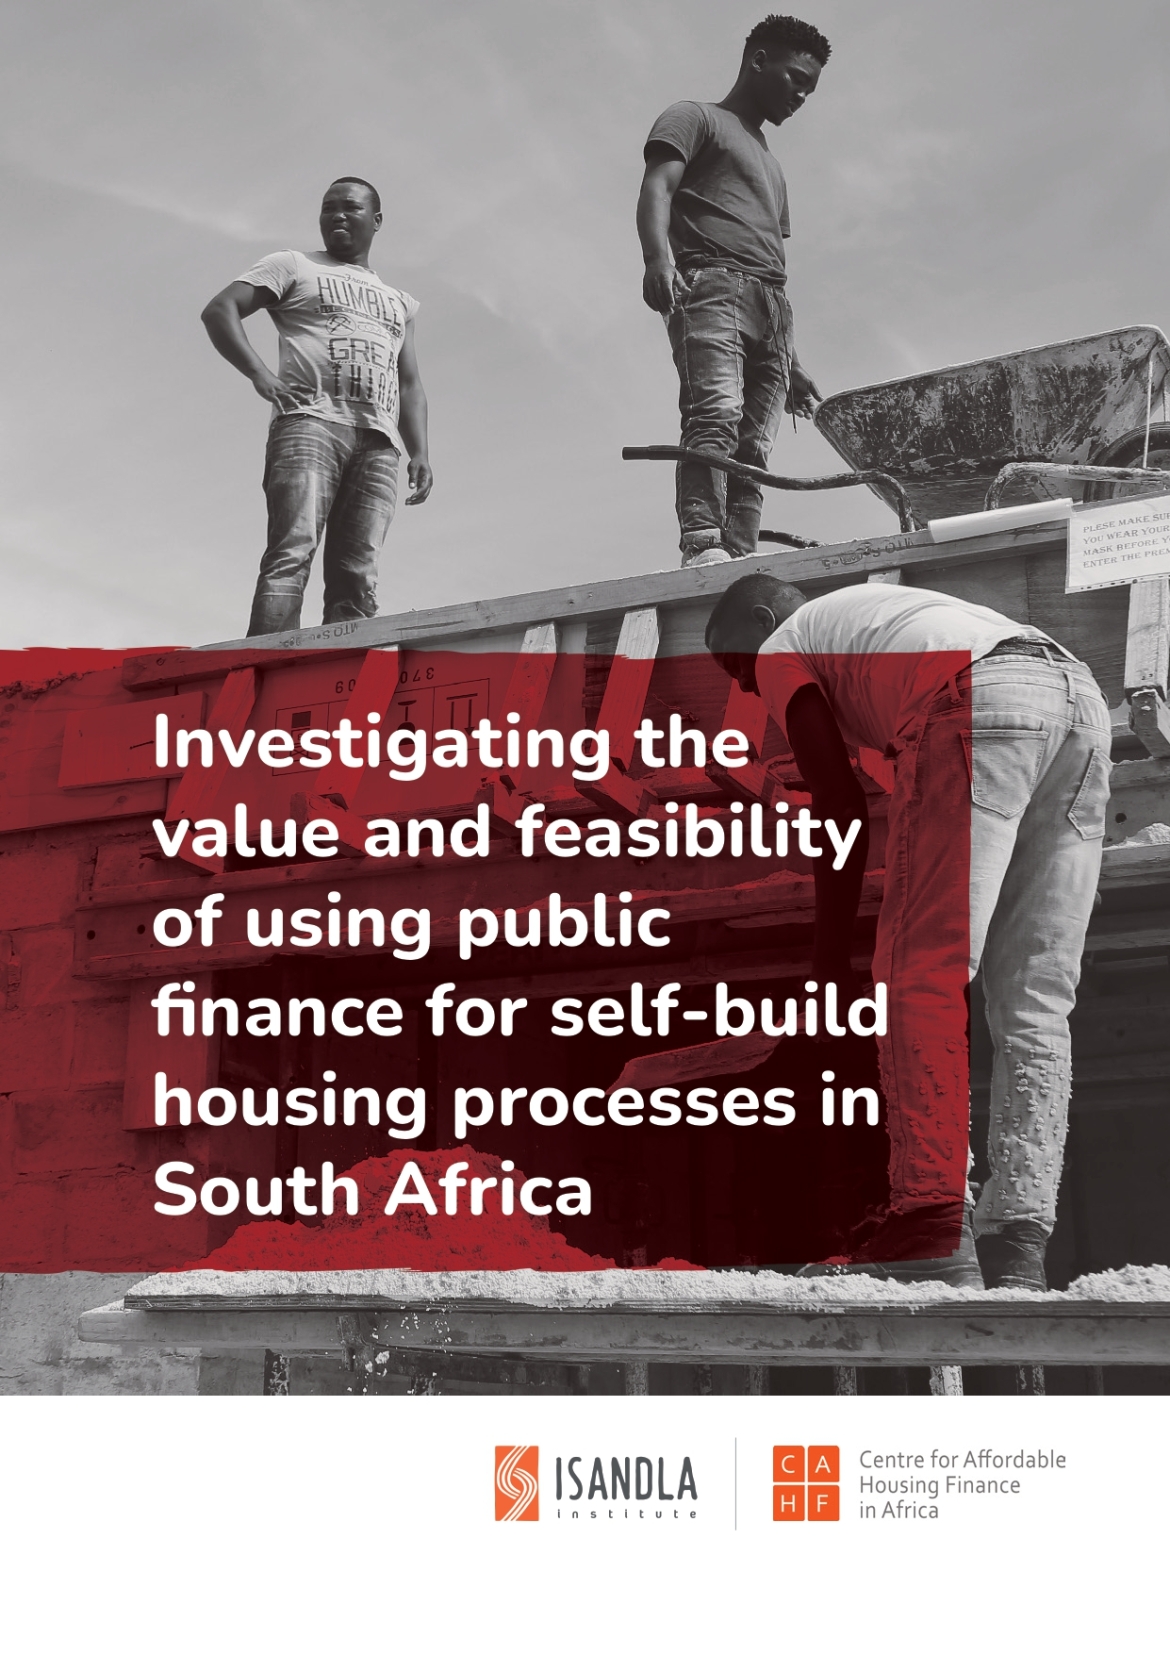 Investigating the value and feasibility of using public finance for self-build housing processes in South Africa